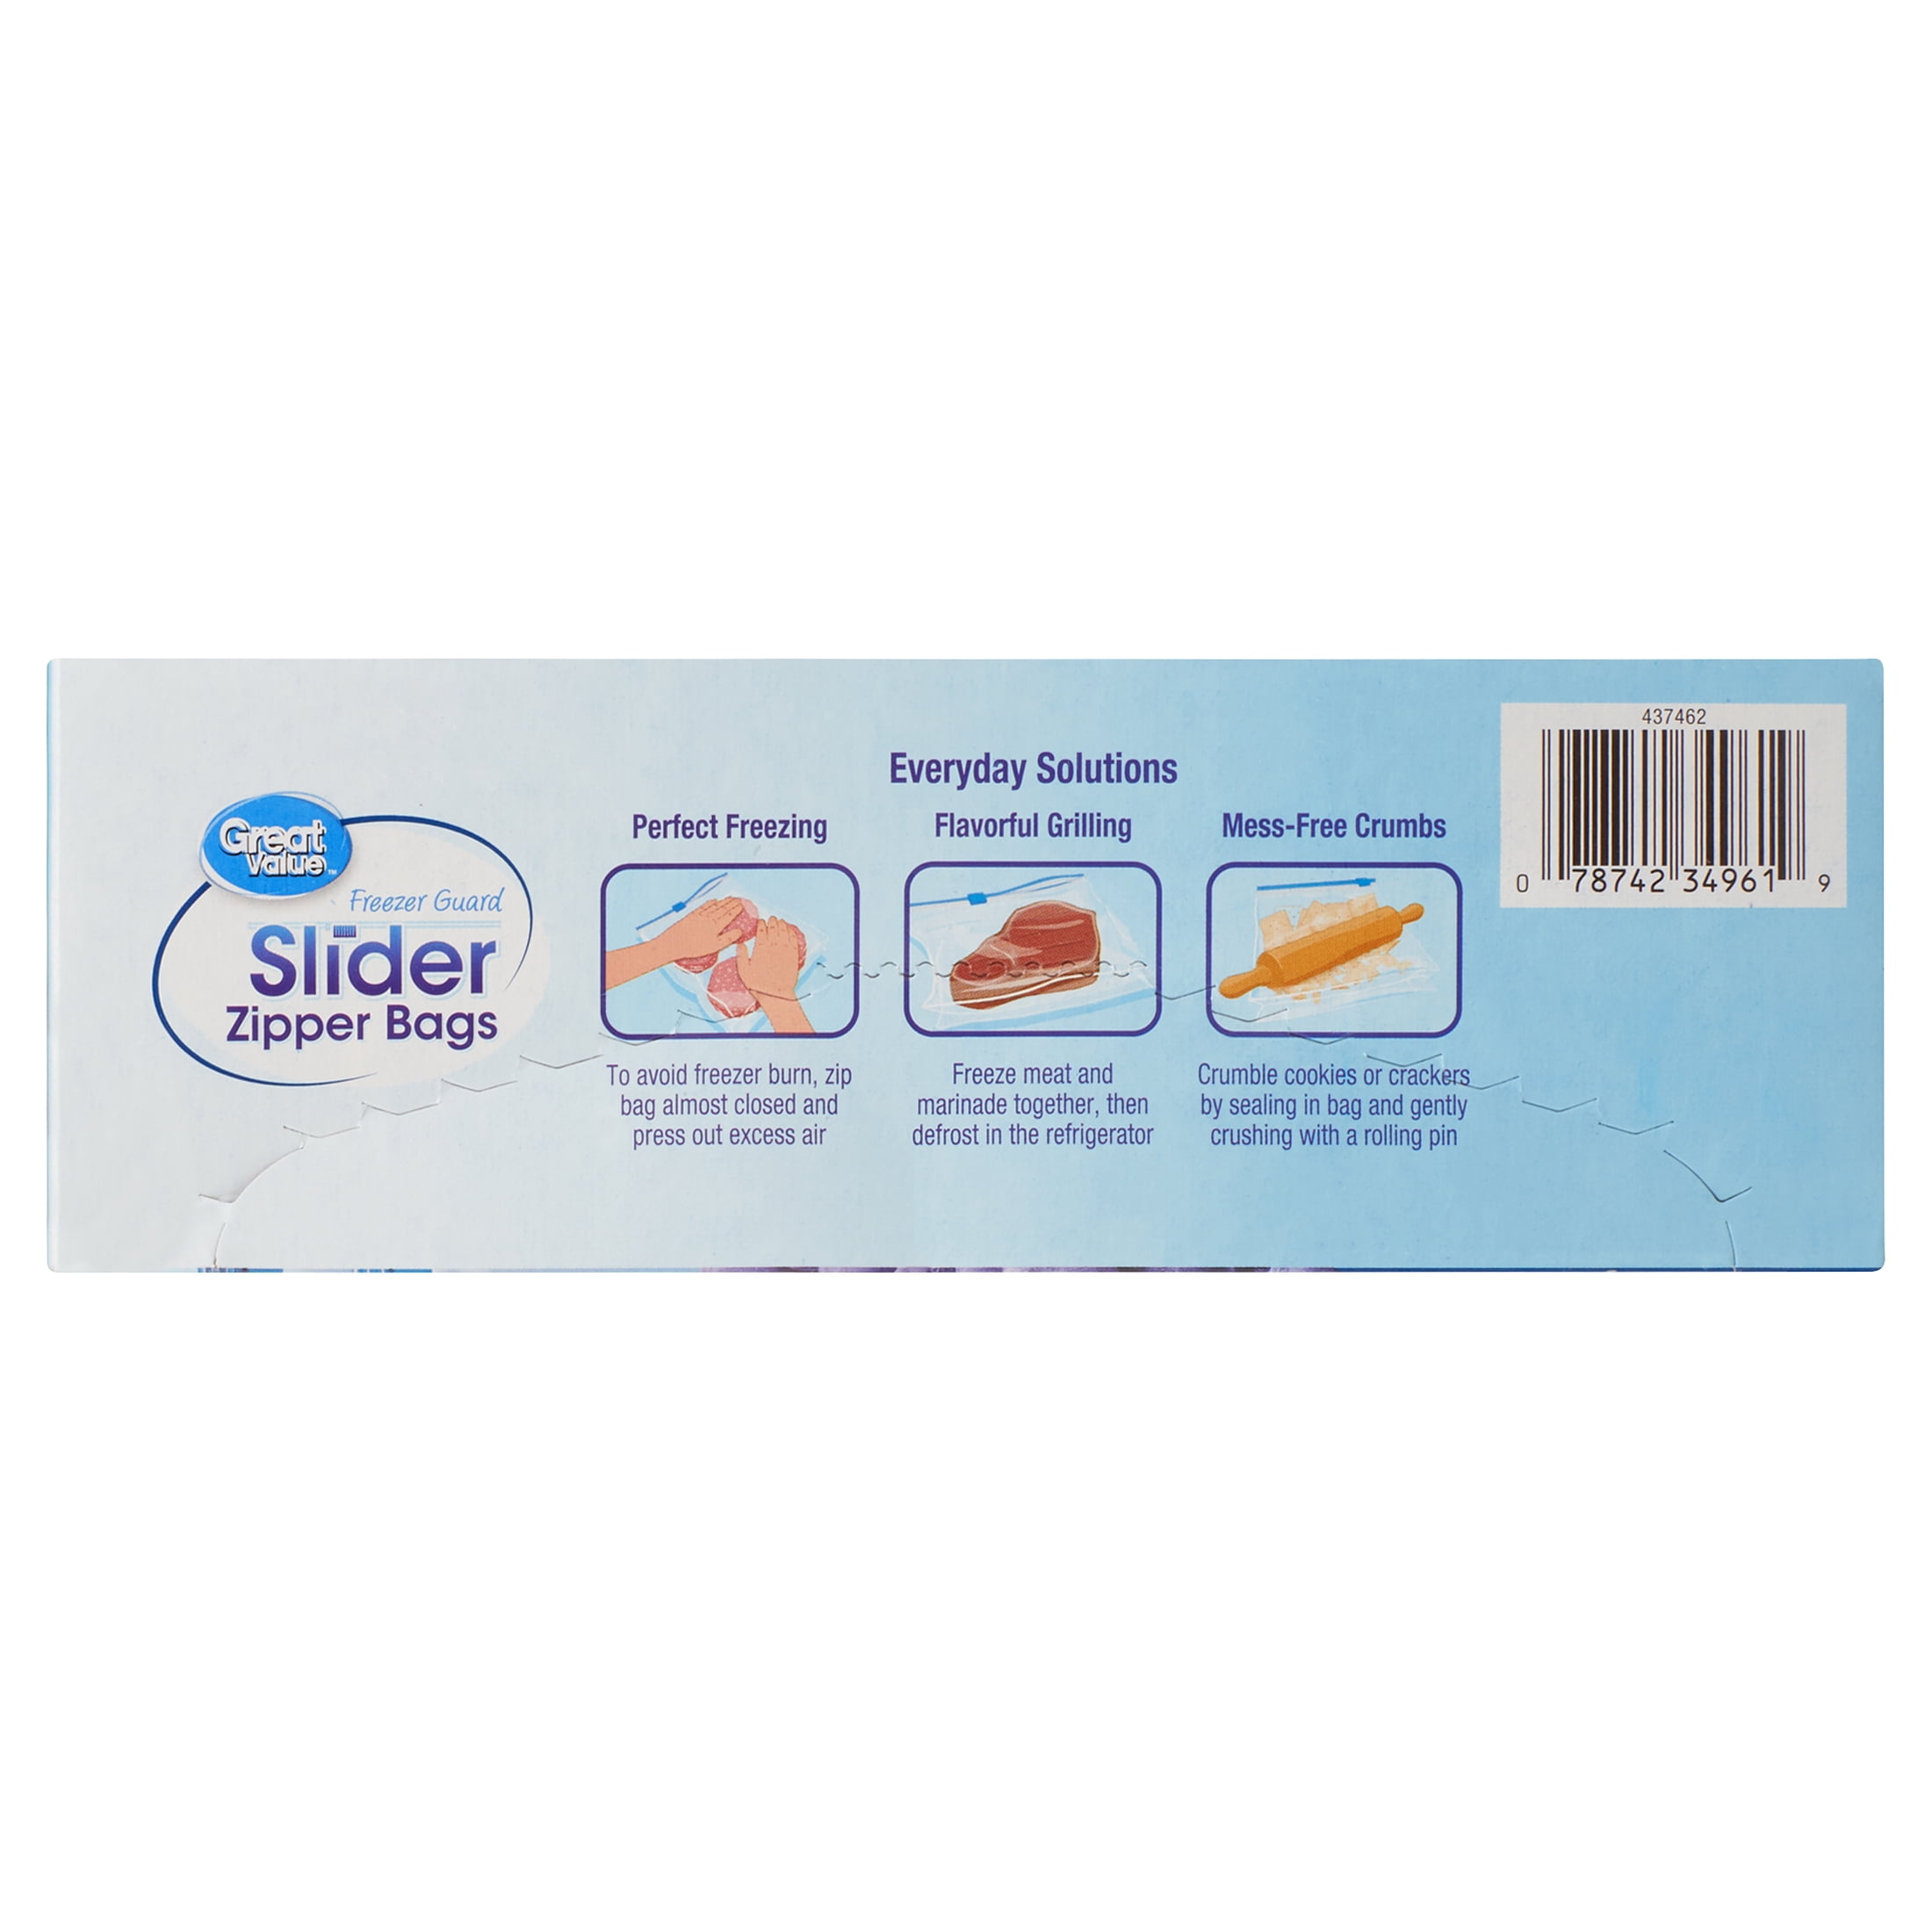 Great Value Fresh Seal Slider Zipper Bags, Quart Storage, 50 Count -  DroneUp Delivery